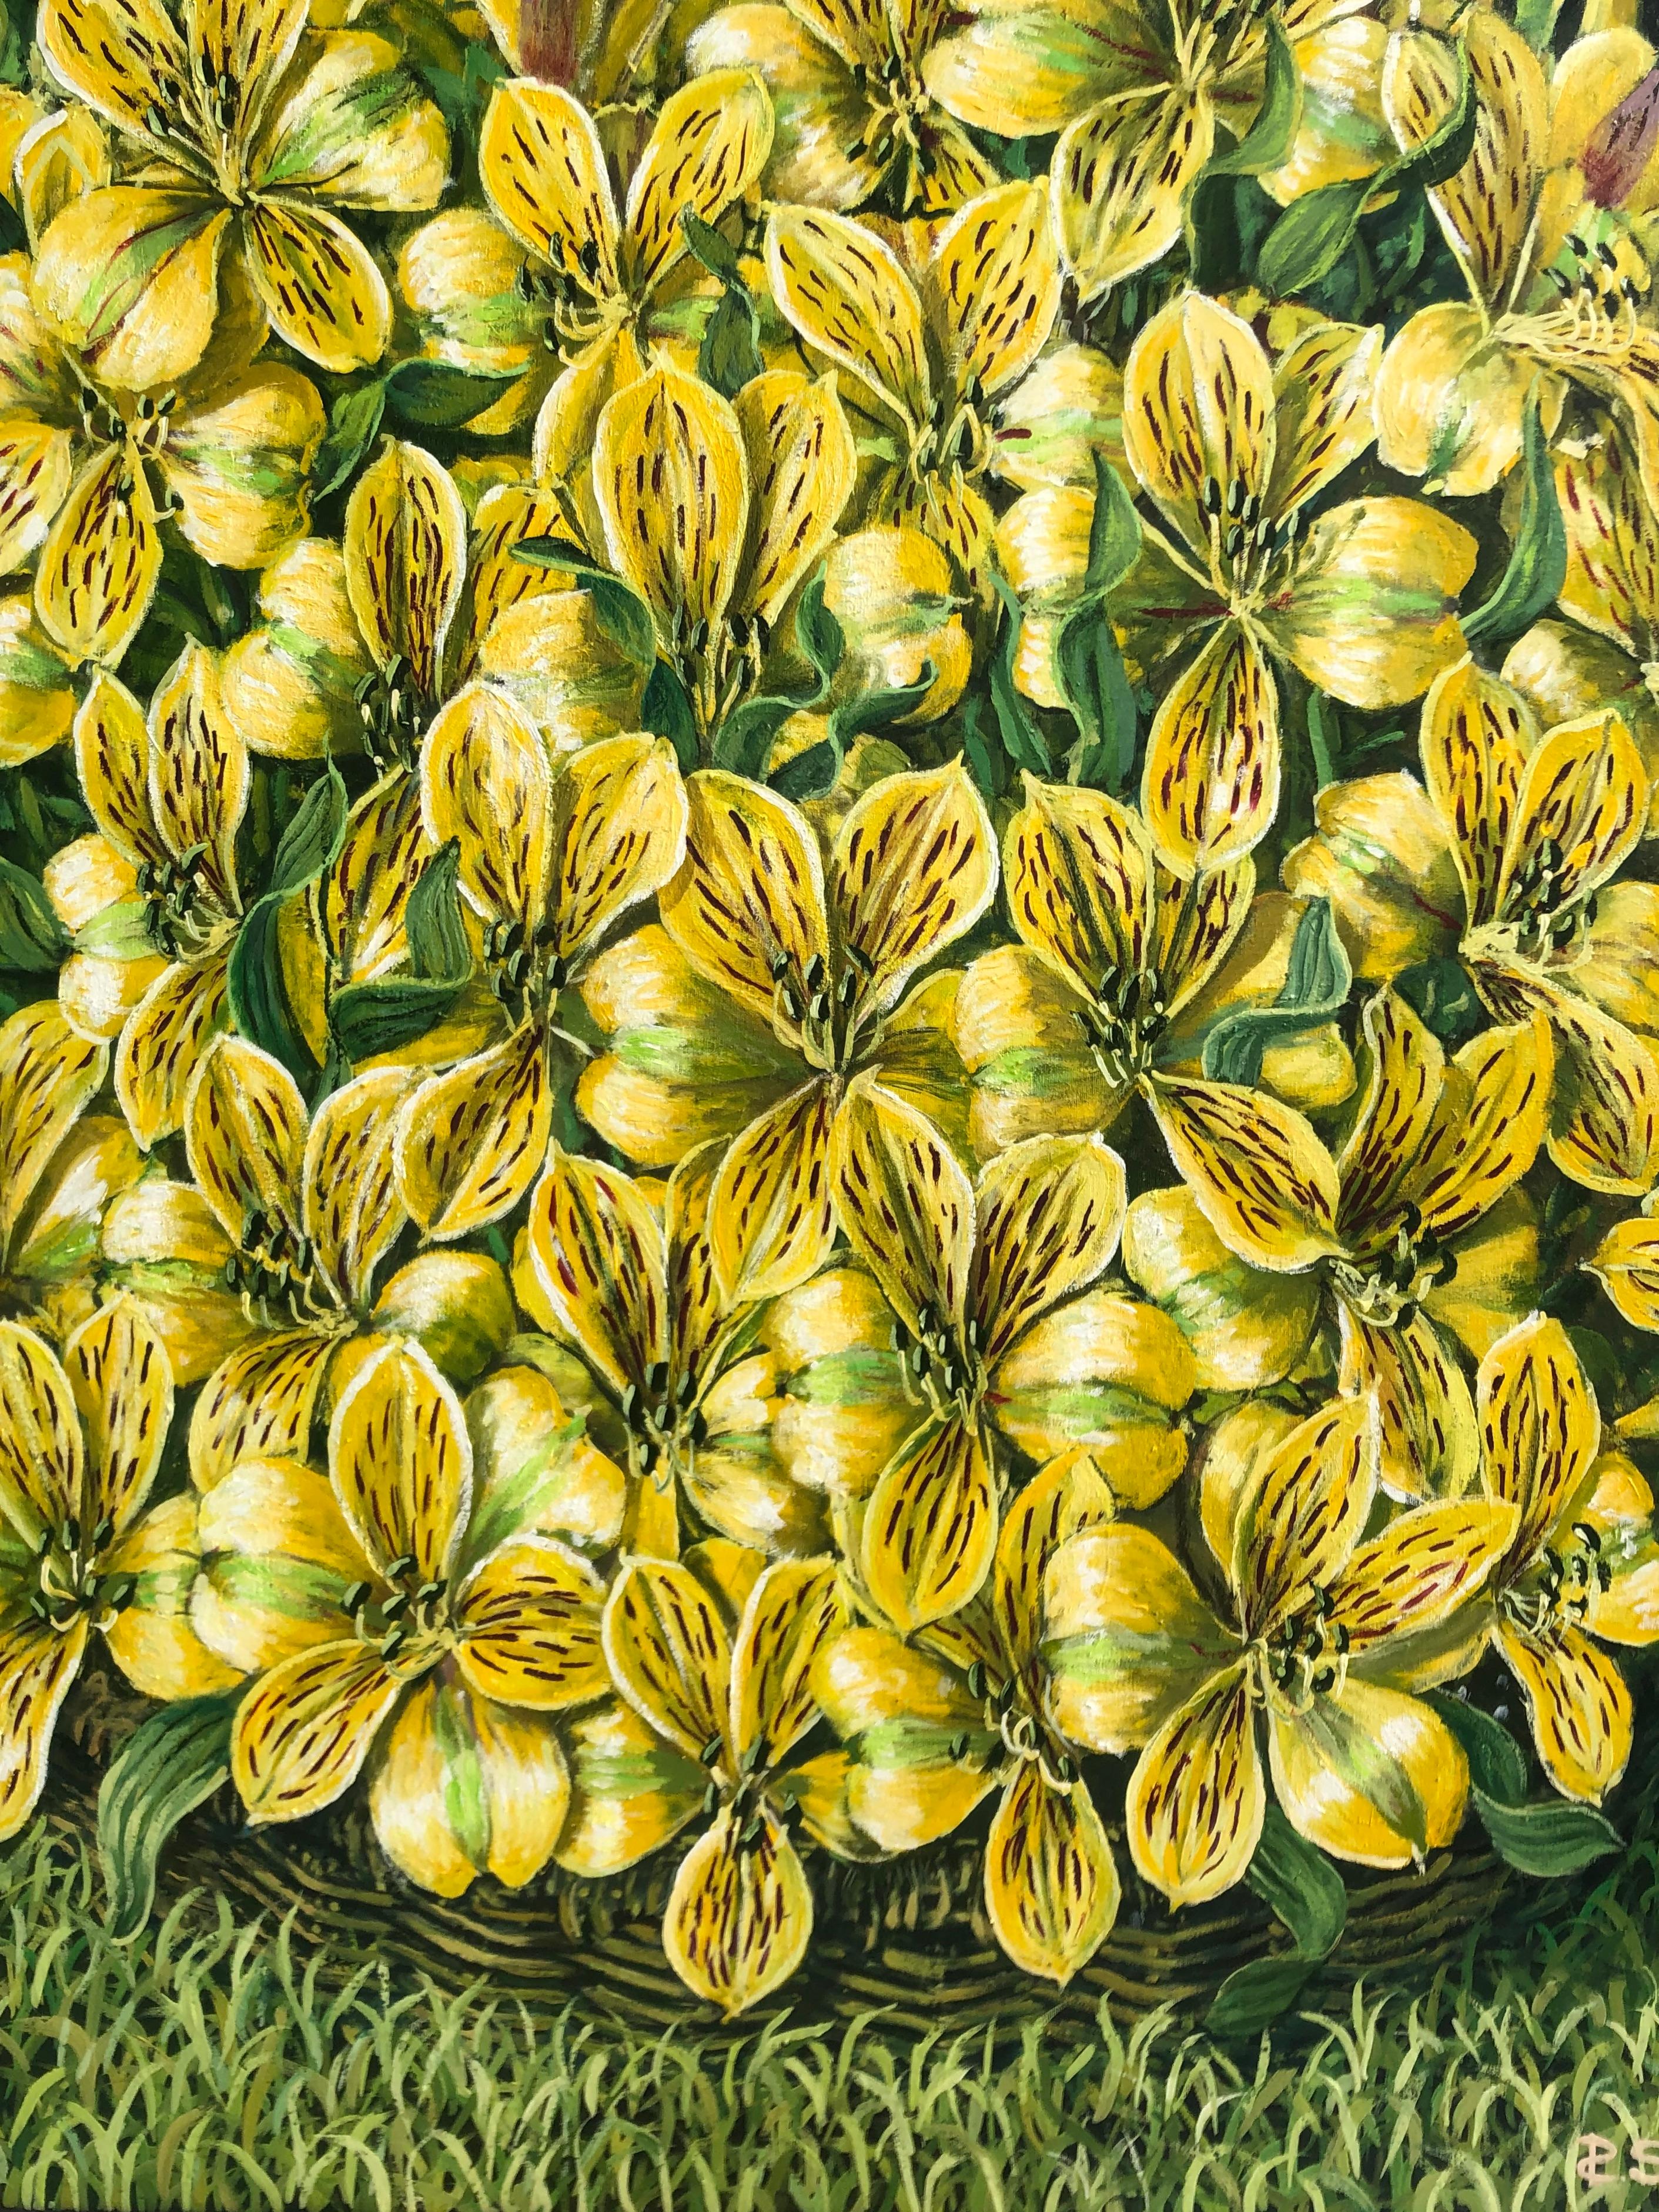 Alstroemeria Yellow Lilys In The Basket large oil painting - Painting by Rafael Saldarriaga